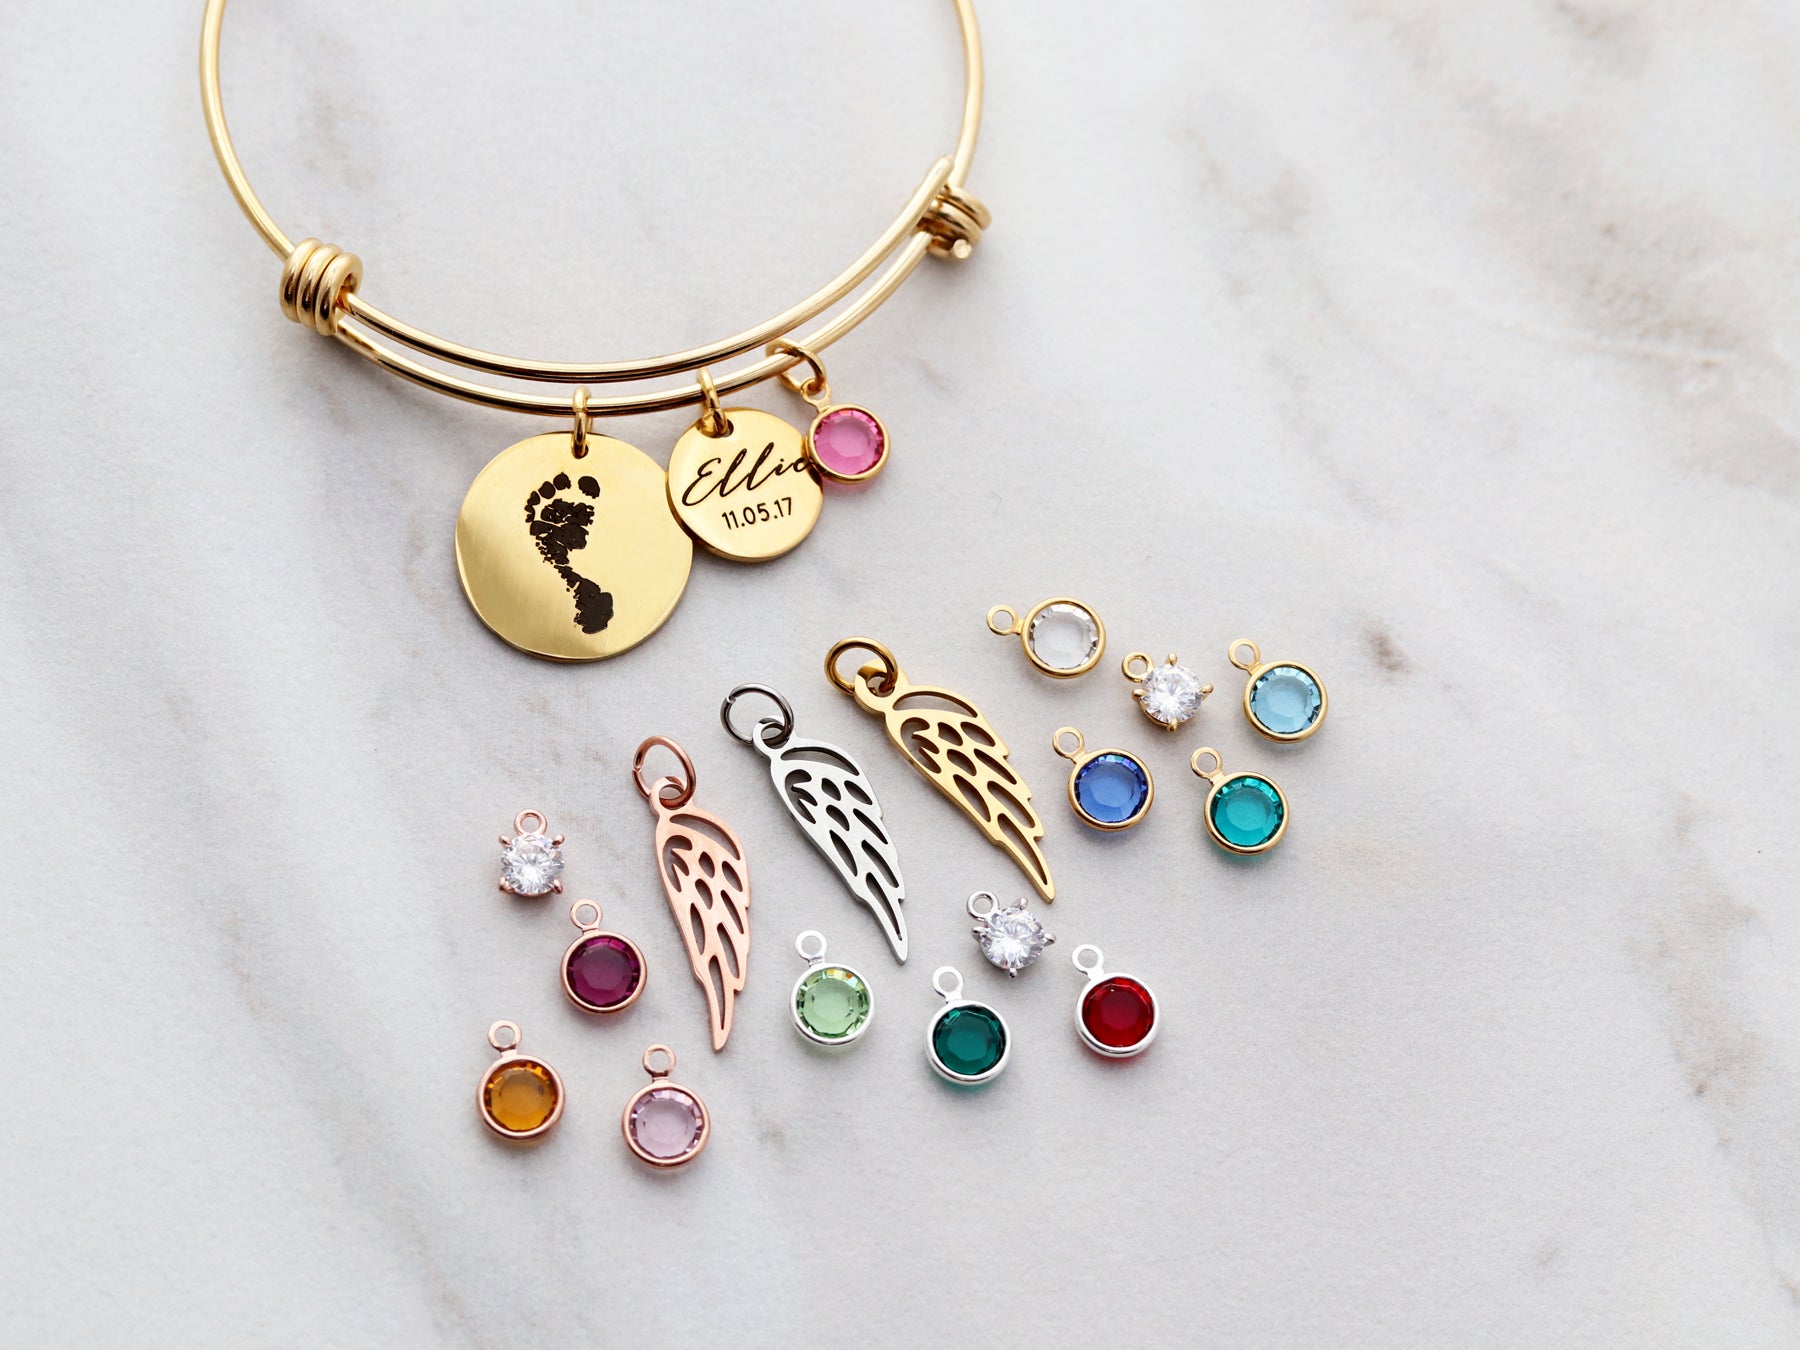 Add A Charm to Your Bangle Rose Gold / September